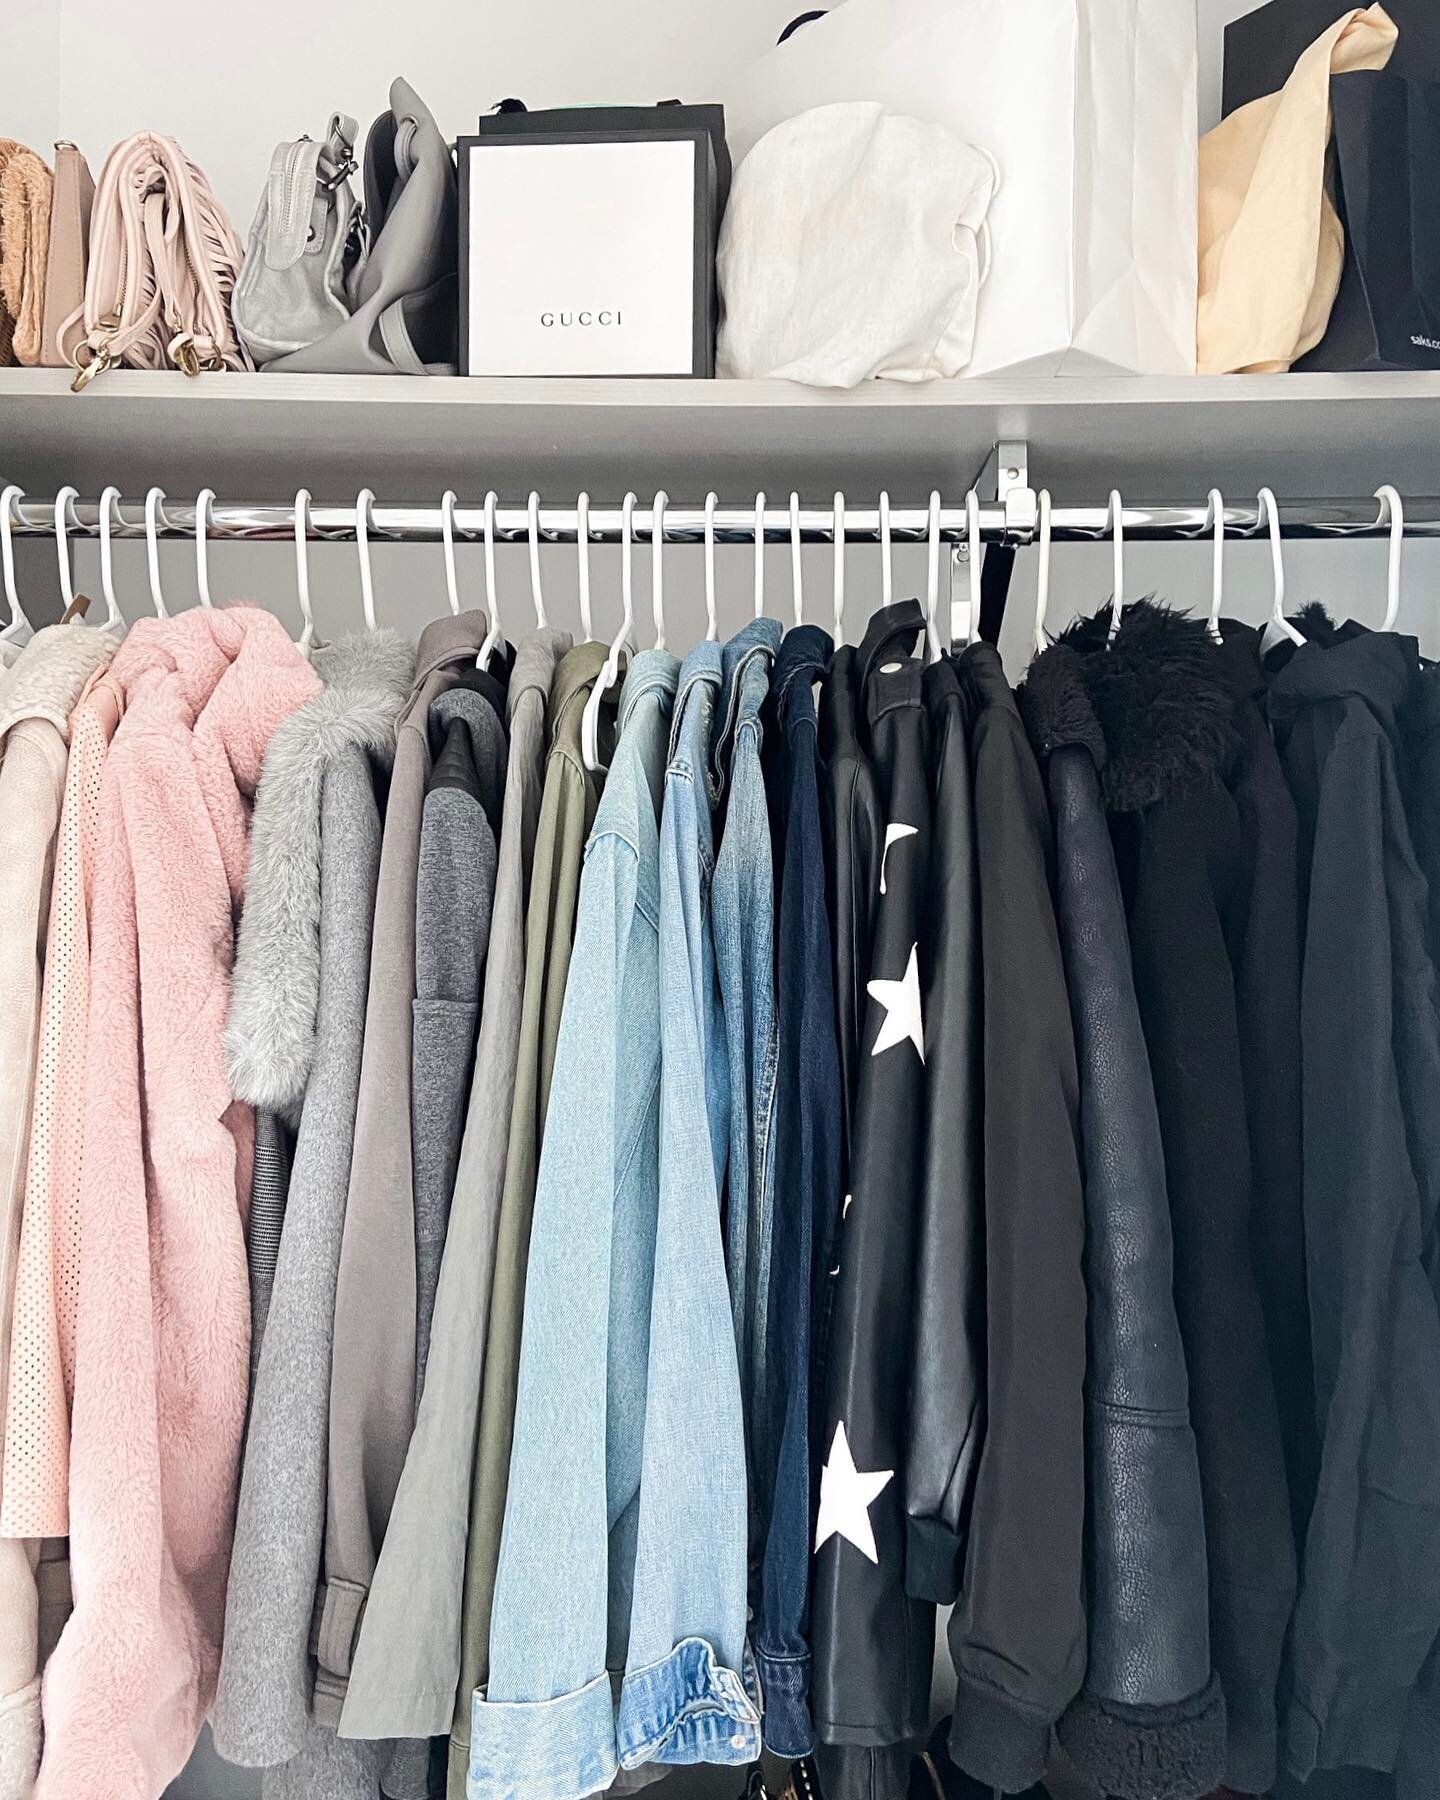 It&rsquo;s not time to put your coats in storage bc it&rsquo;s never time to put your coats in storage
.
.
.
.
#organize #organization #organizationtips #organizationhacks #closetorganization #closettour #closet #home #homeorganization #nycapartment